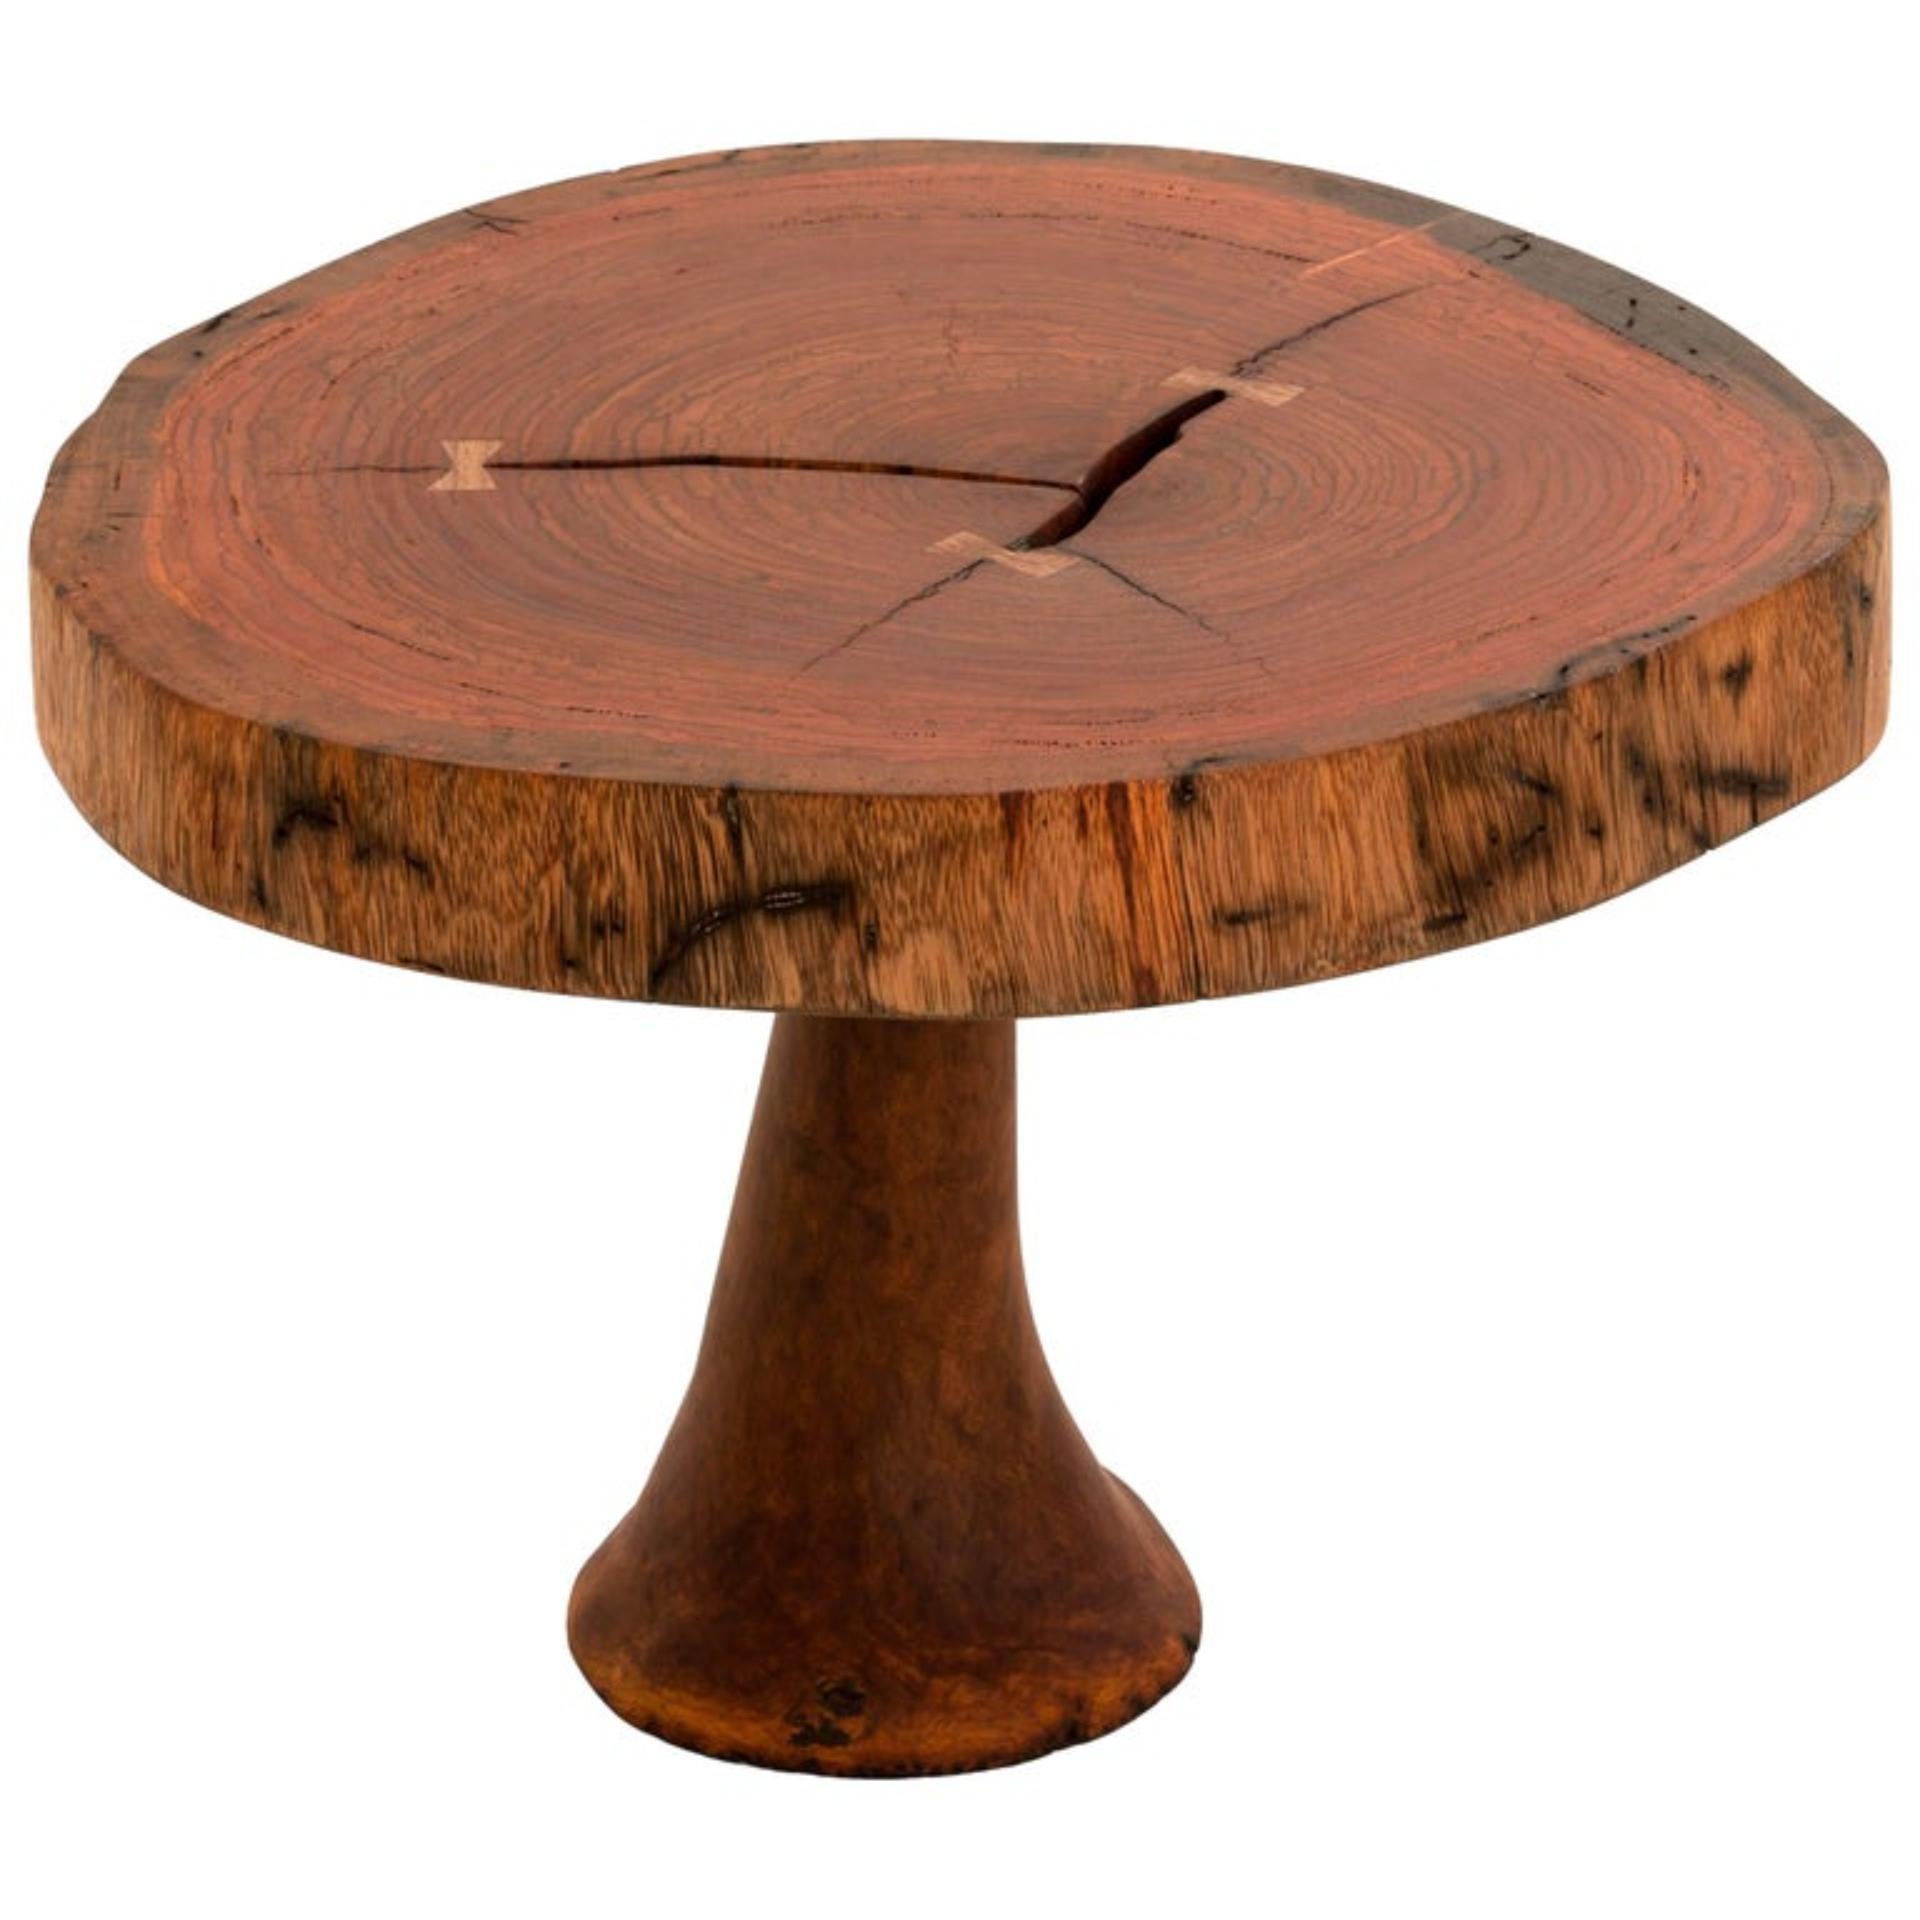 Unique signed table by Jörg Pietschmann
Table · Ebiara / Australian grass tree, T1104
Measures: H 43 x W 58 x D 55 cm tabletop 7 cm
Red coloured wood with three butterfly inlays, fixed on a leg of Australian grass tree.
Polished oil